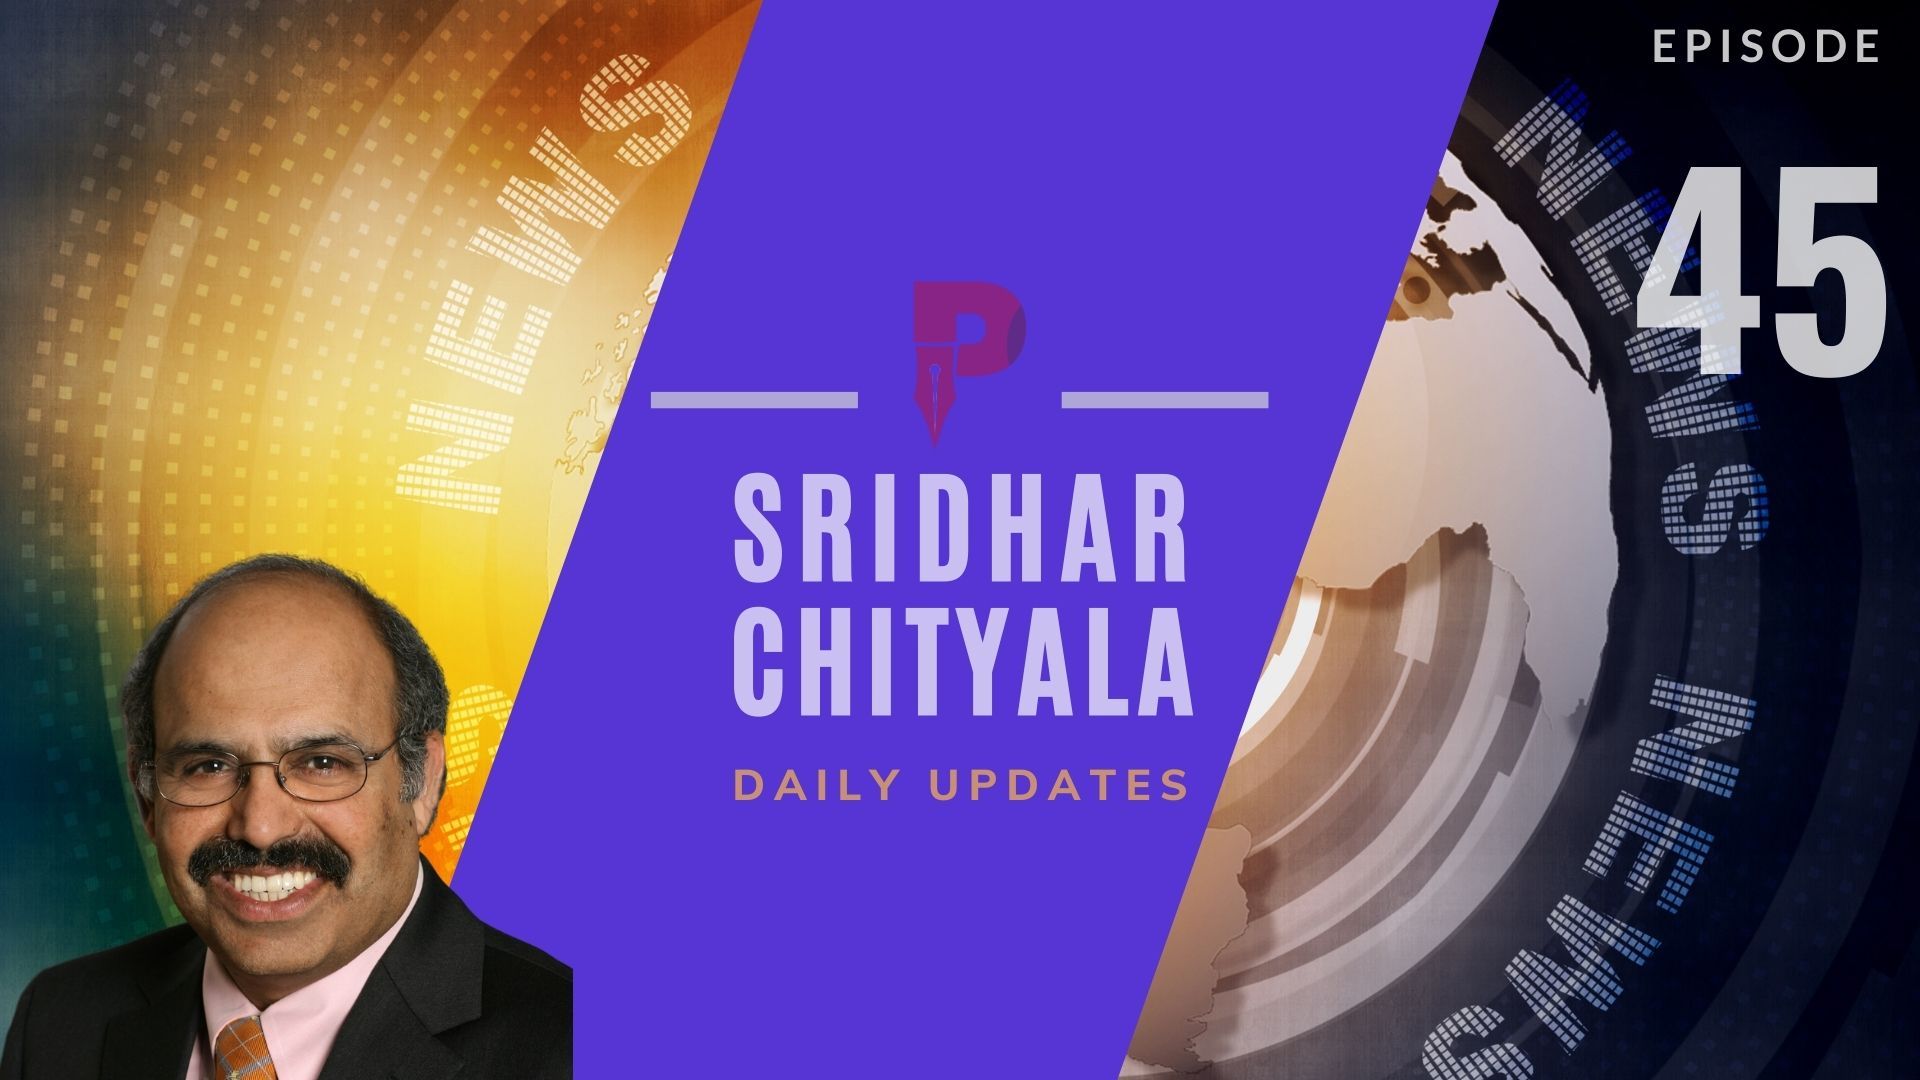 #WeekdayNewsCapsule #Episode45 Sridhar Chityala takes us through the happenings in various states of the US